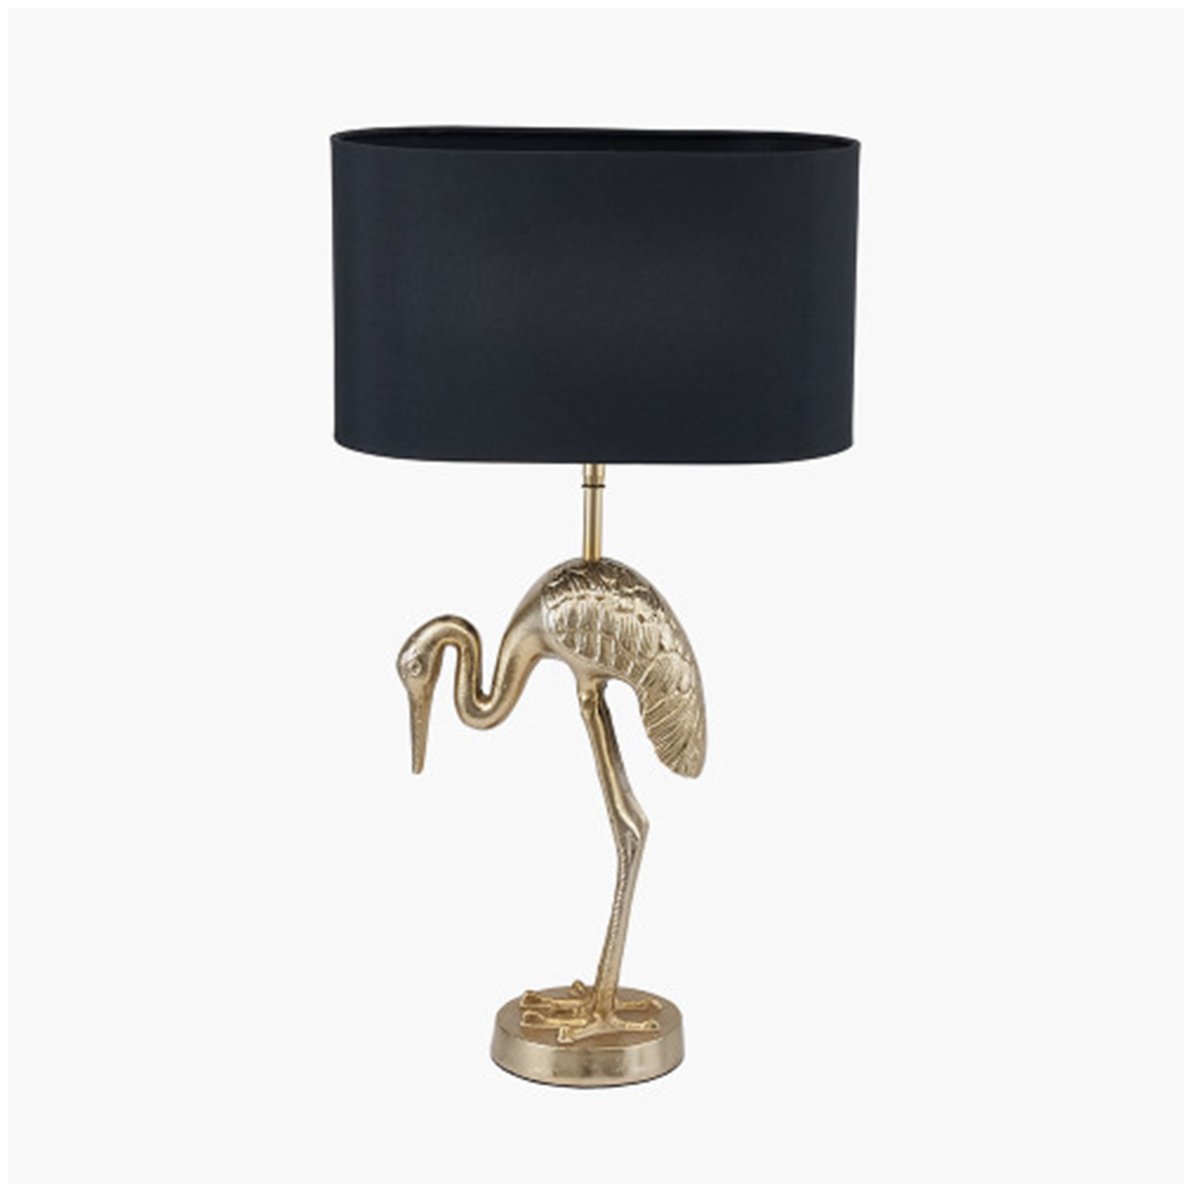 Gold Crane Lamp with Black Lampshade 